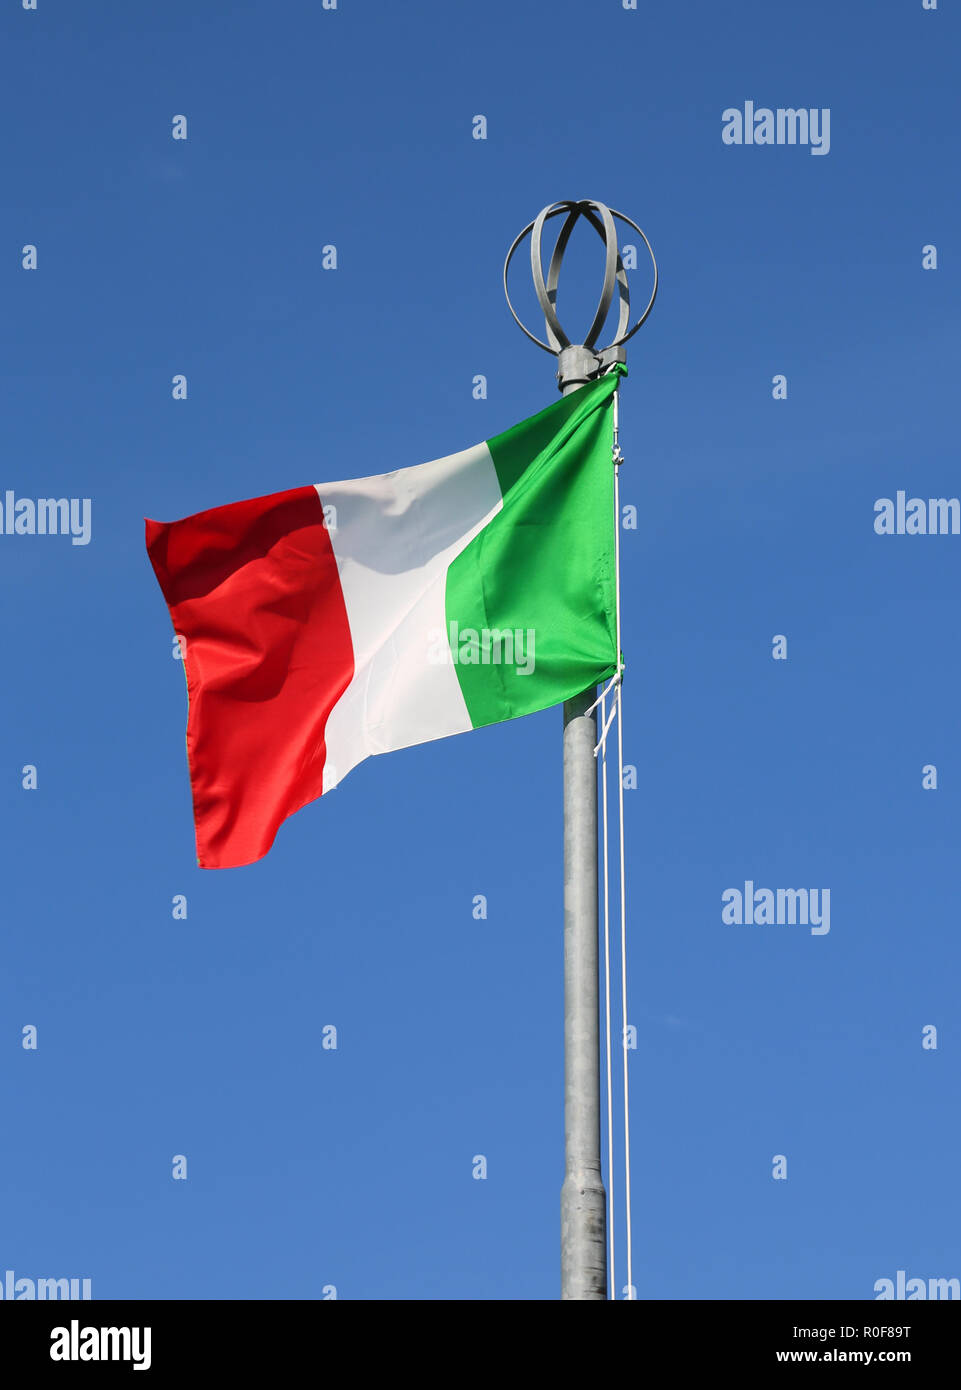 Big Italian flag with colors red white and green waves on the blue sky Stock Photo